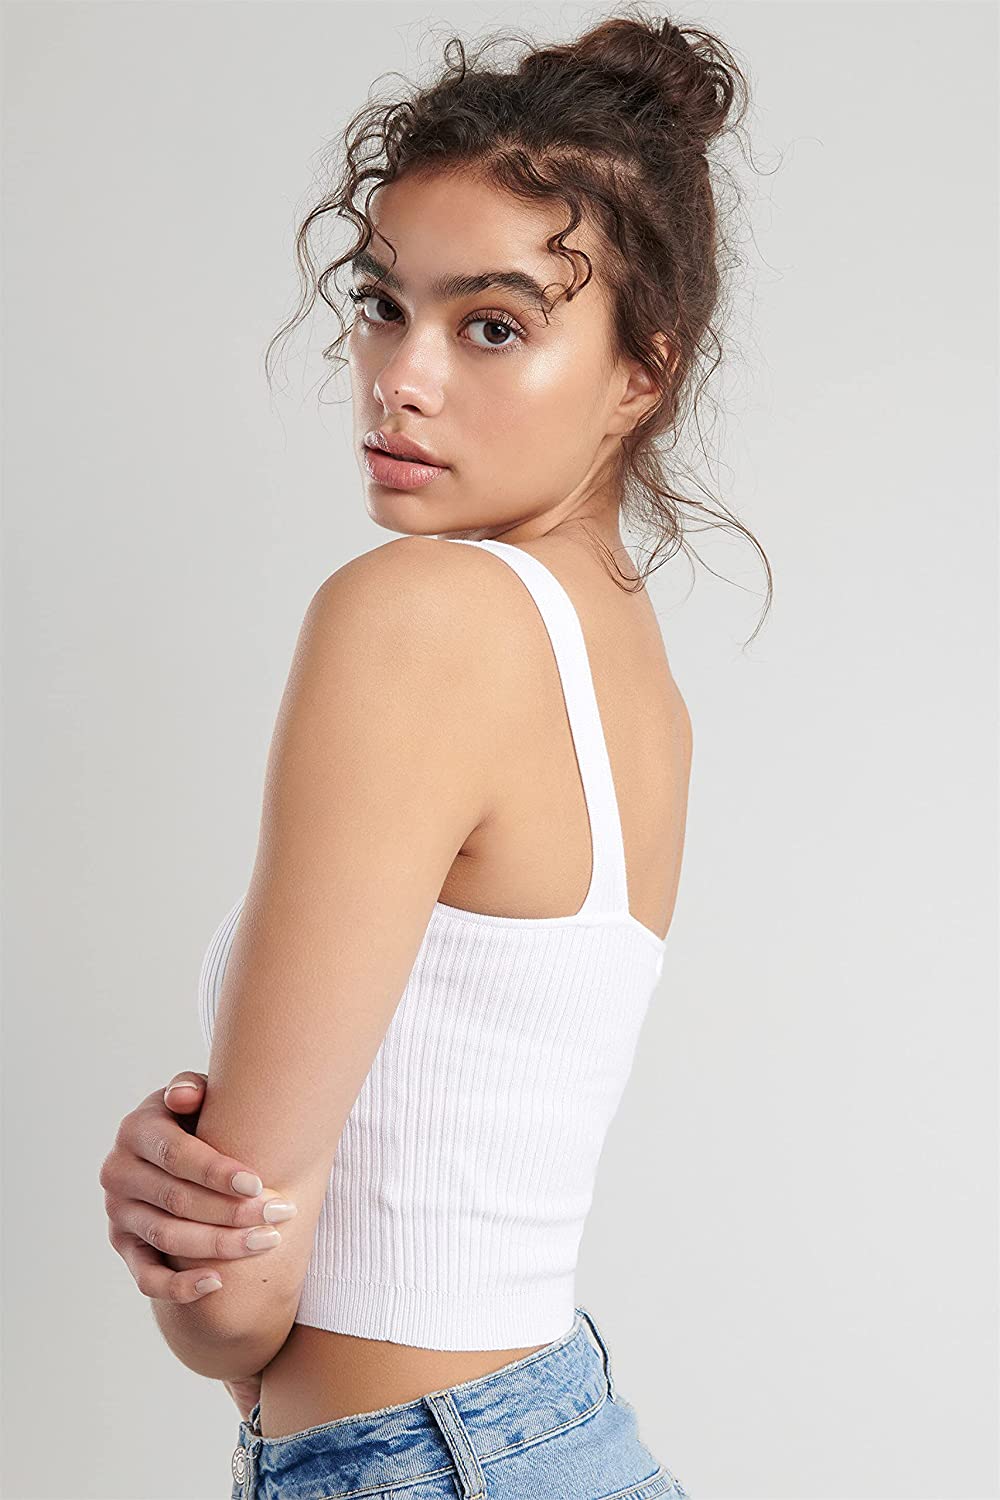 Classic White Cotton/Poly Top